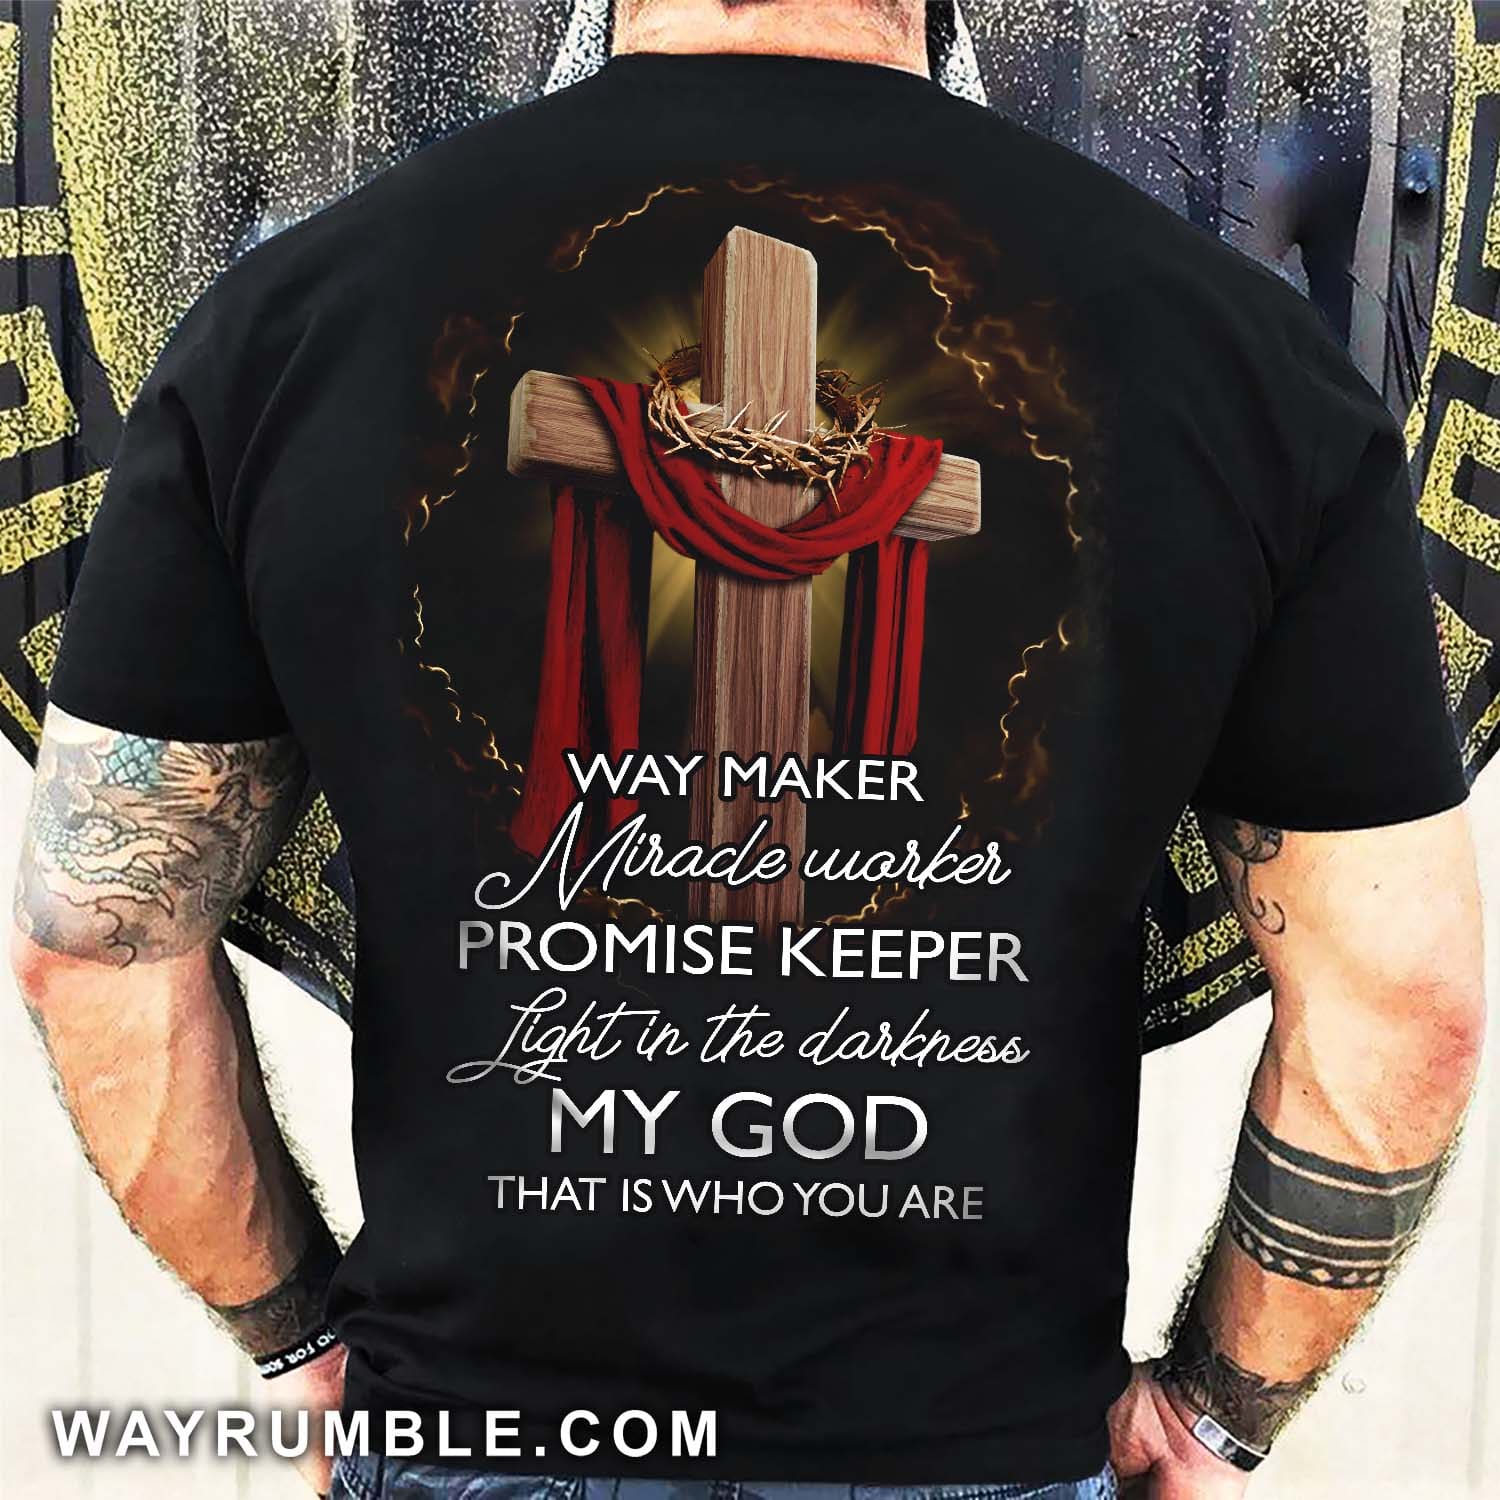 Wooden cross, Crown of thorns, Jesus is the light in the darkness – Jesus Back-printed T Shirt